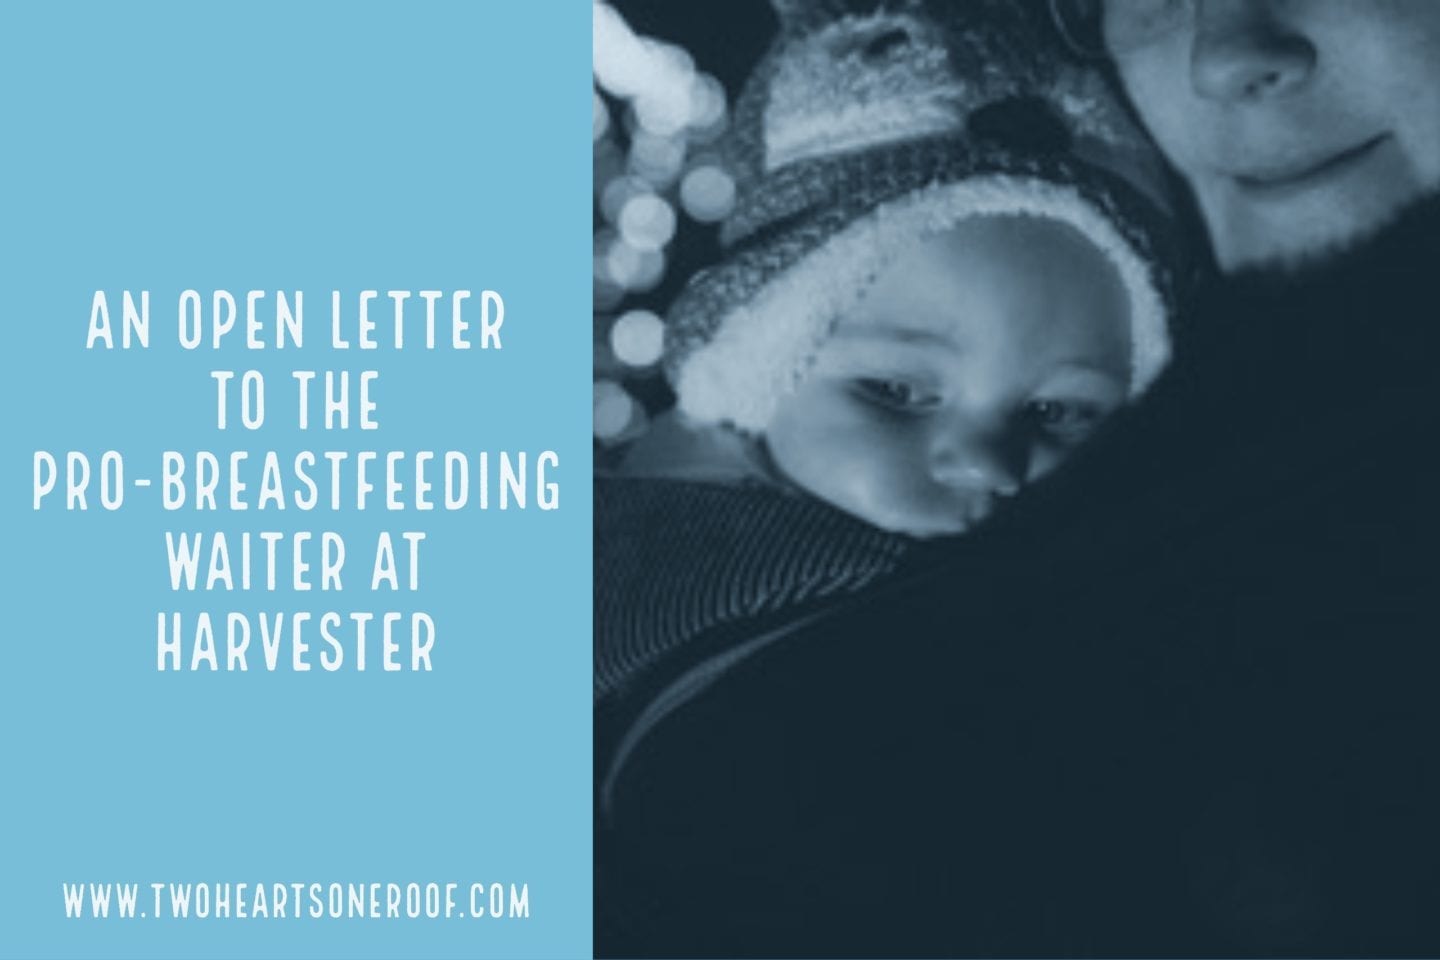 An open letter to the Pro-Breastfeeding Waiter at Harvester